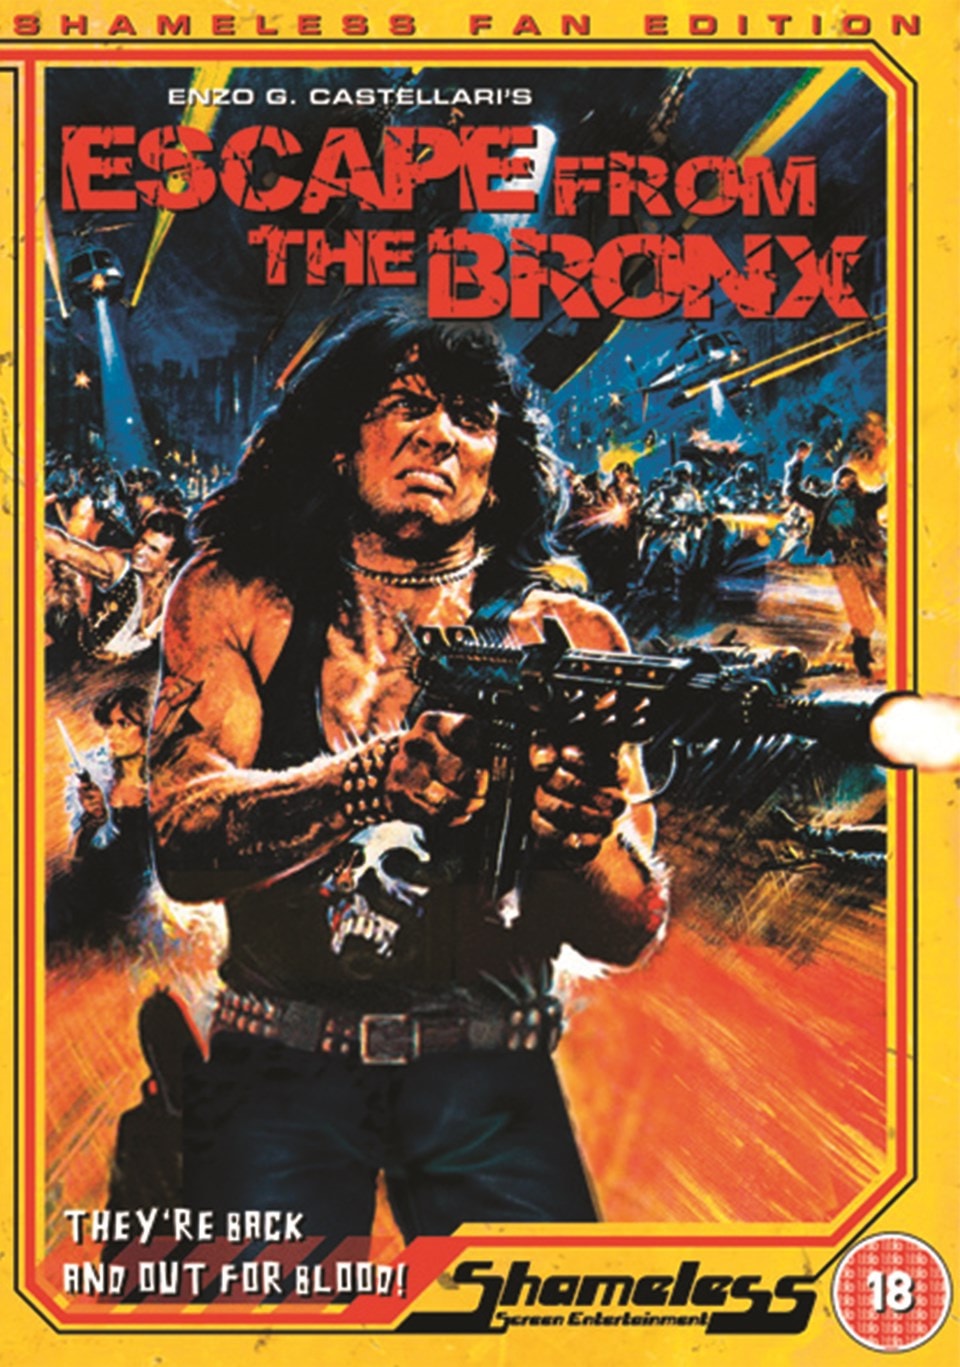 Bronx Warriors 2 - Escape from the Bronx | DVD | Free shipping over £20 ...